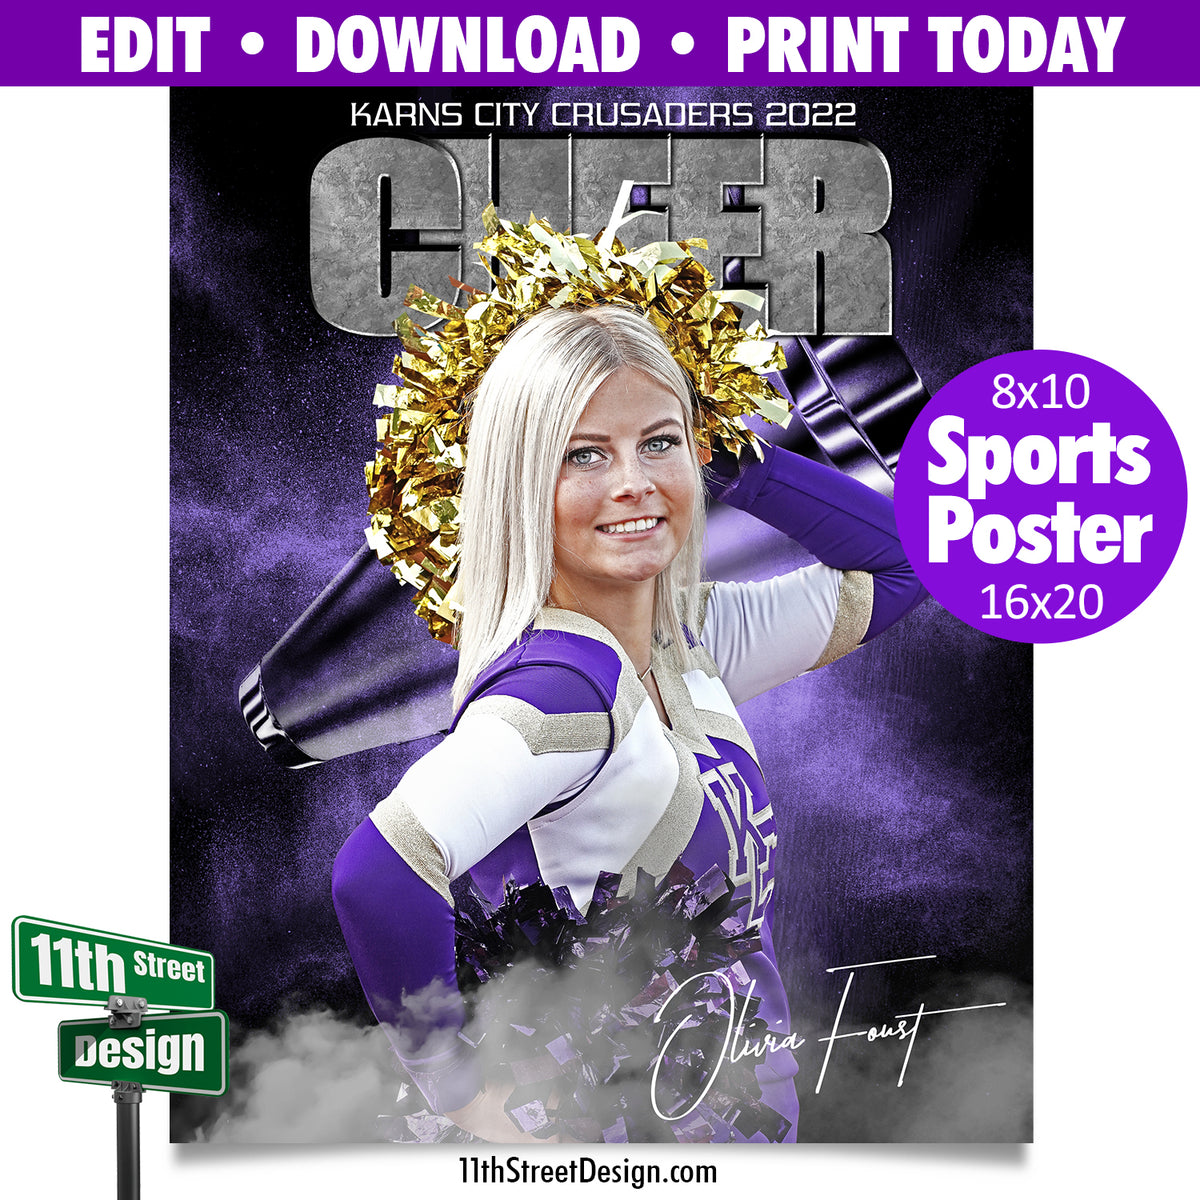 Sports Poster • Edit Now Online • Print Today • Digital Download • Custom Sports Photos • Senior Day Night Poster • Rocked Cheer Template